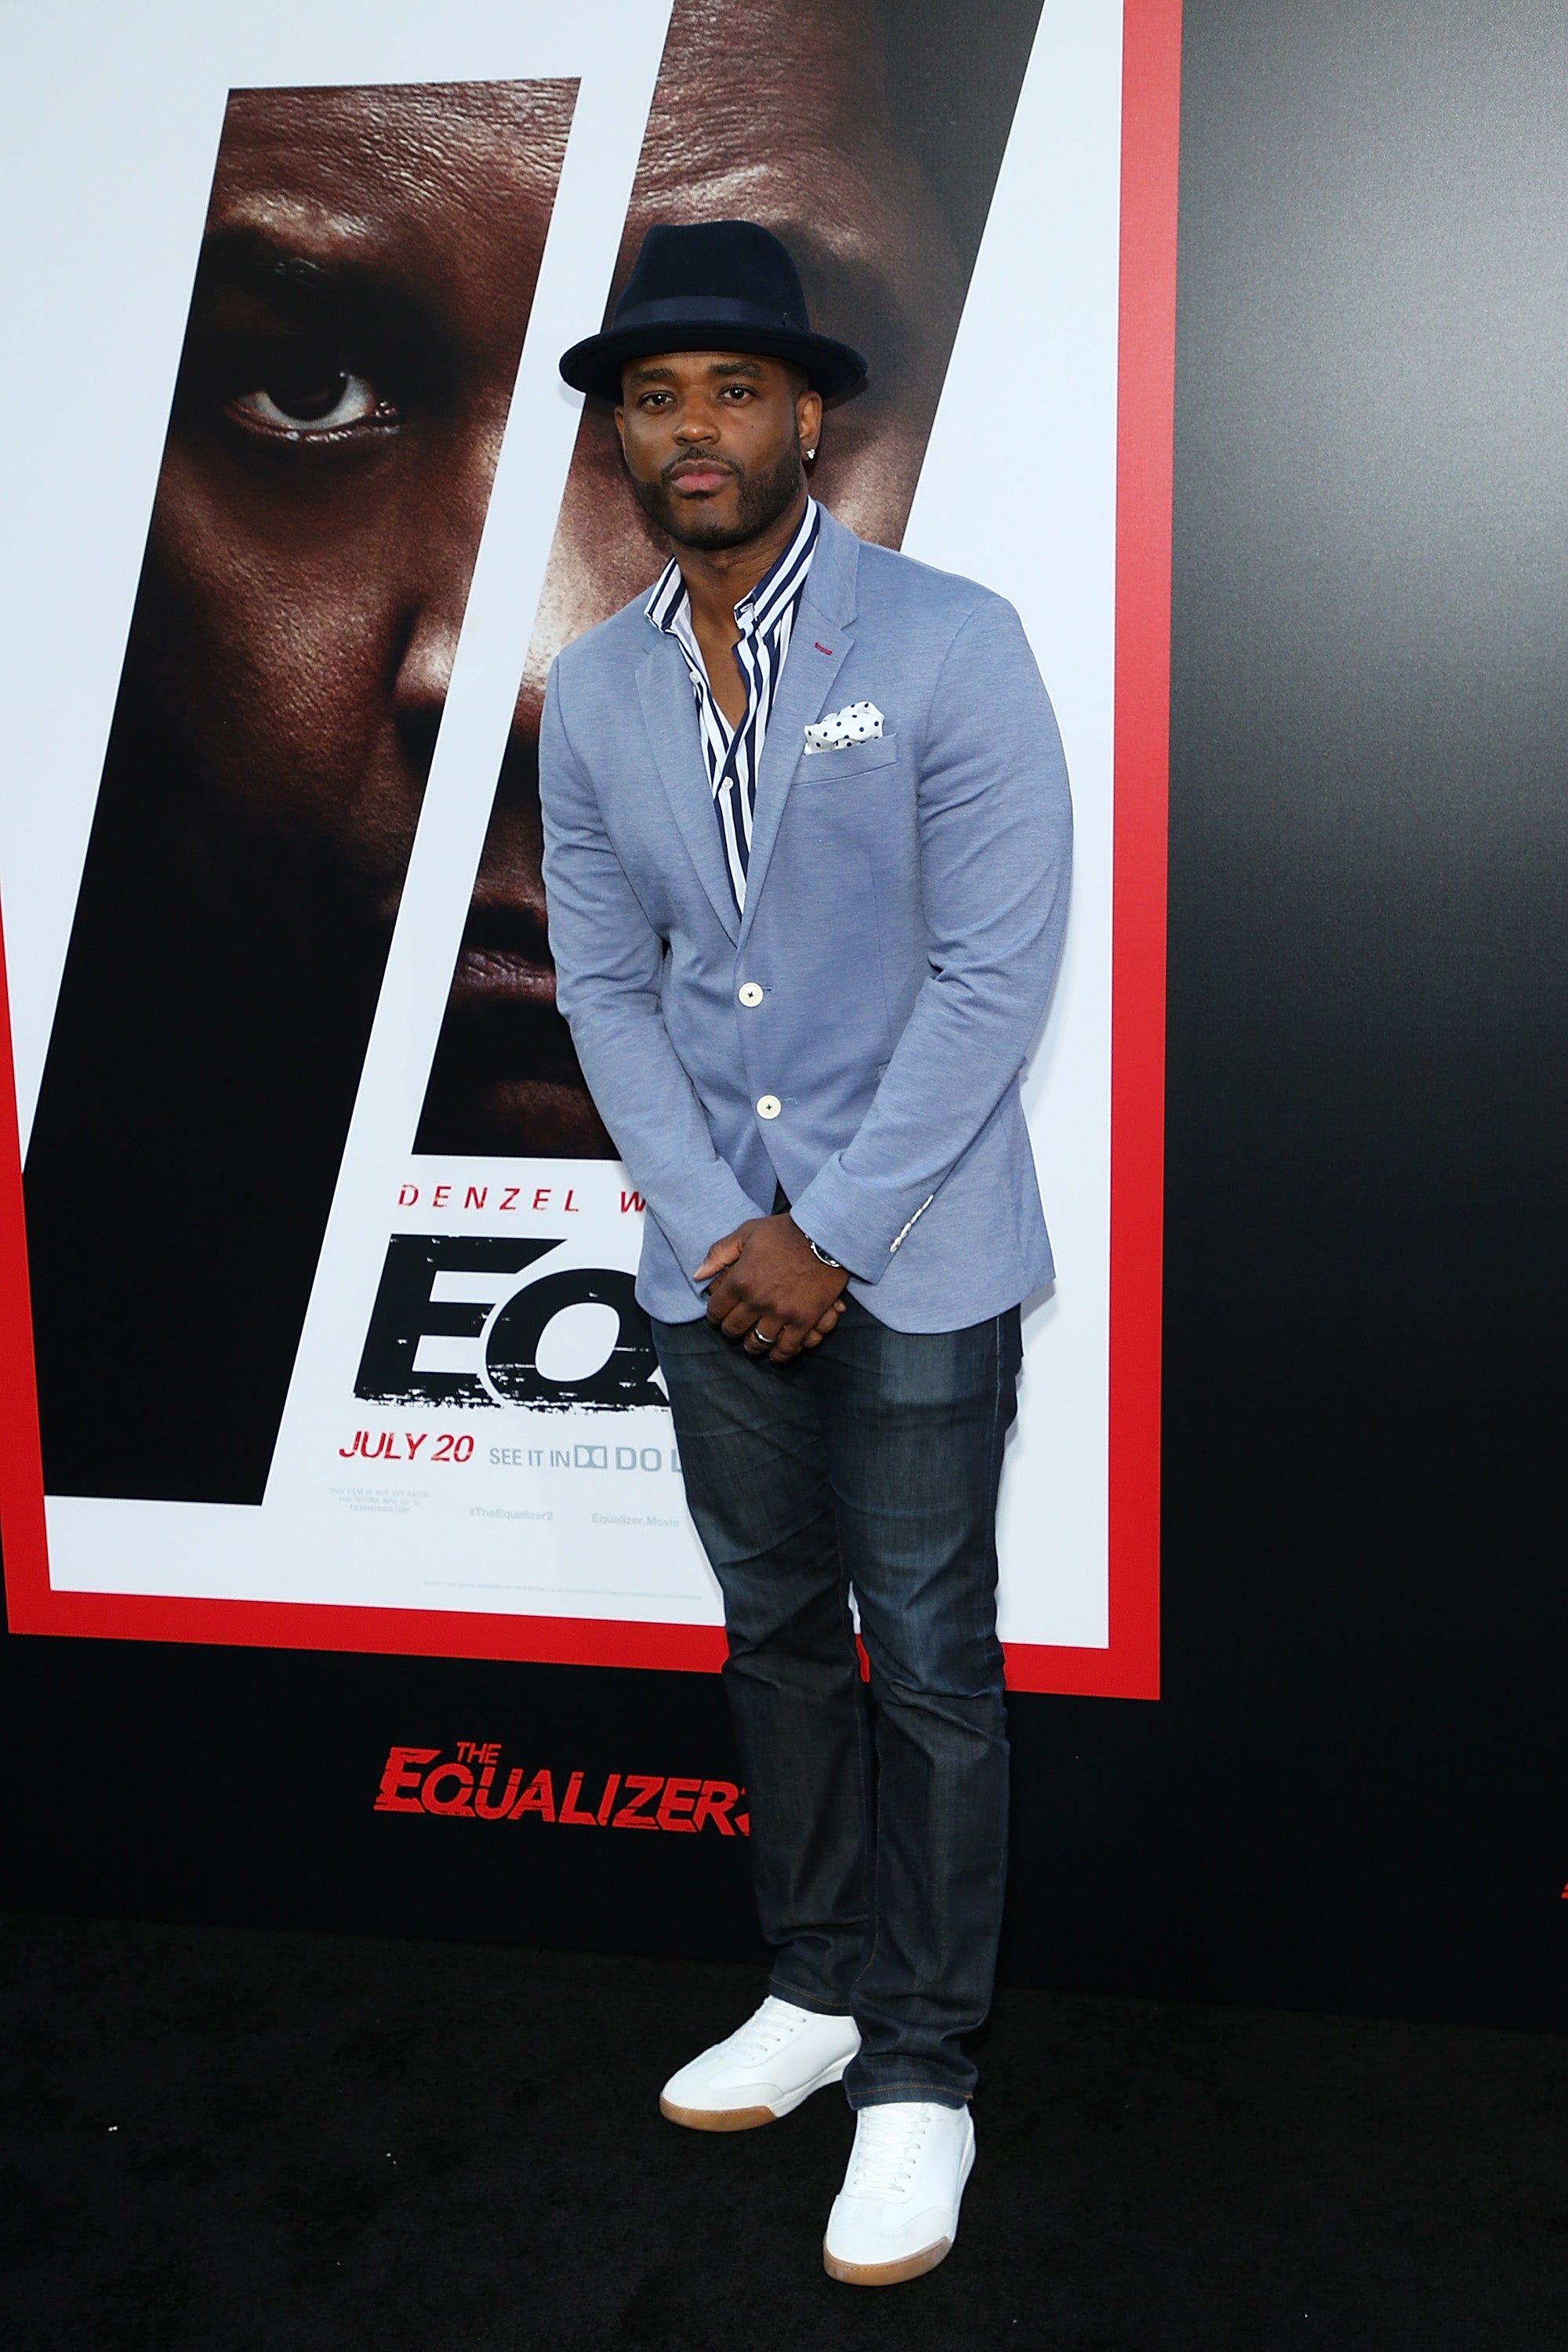 Denzel Washington And A Slew Of Celebrities Attend The 'The Equalizer 2' Premiere
